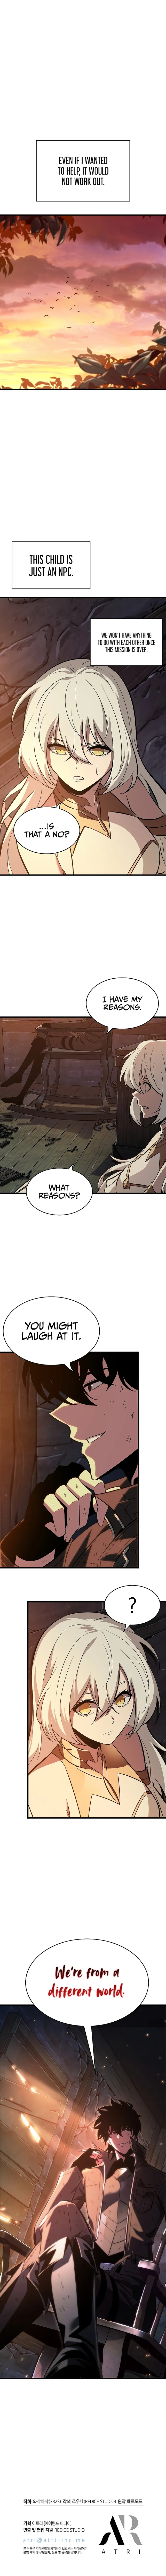 Pick Me Up Chapter 51 page 10